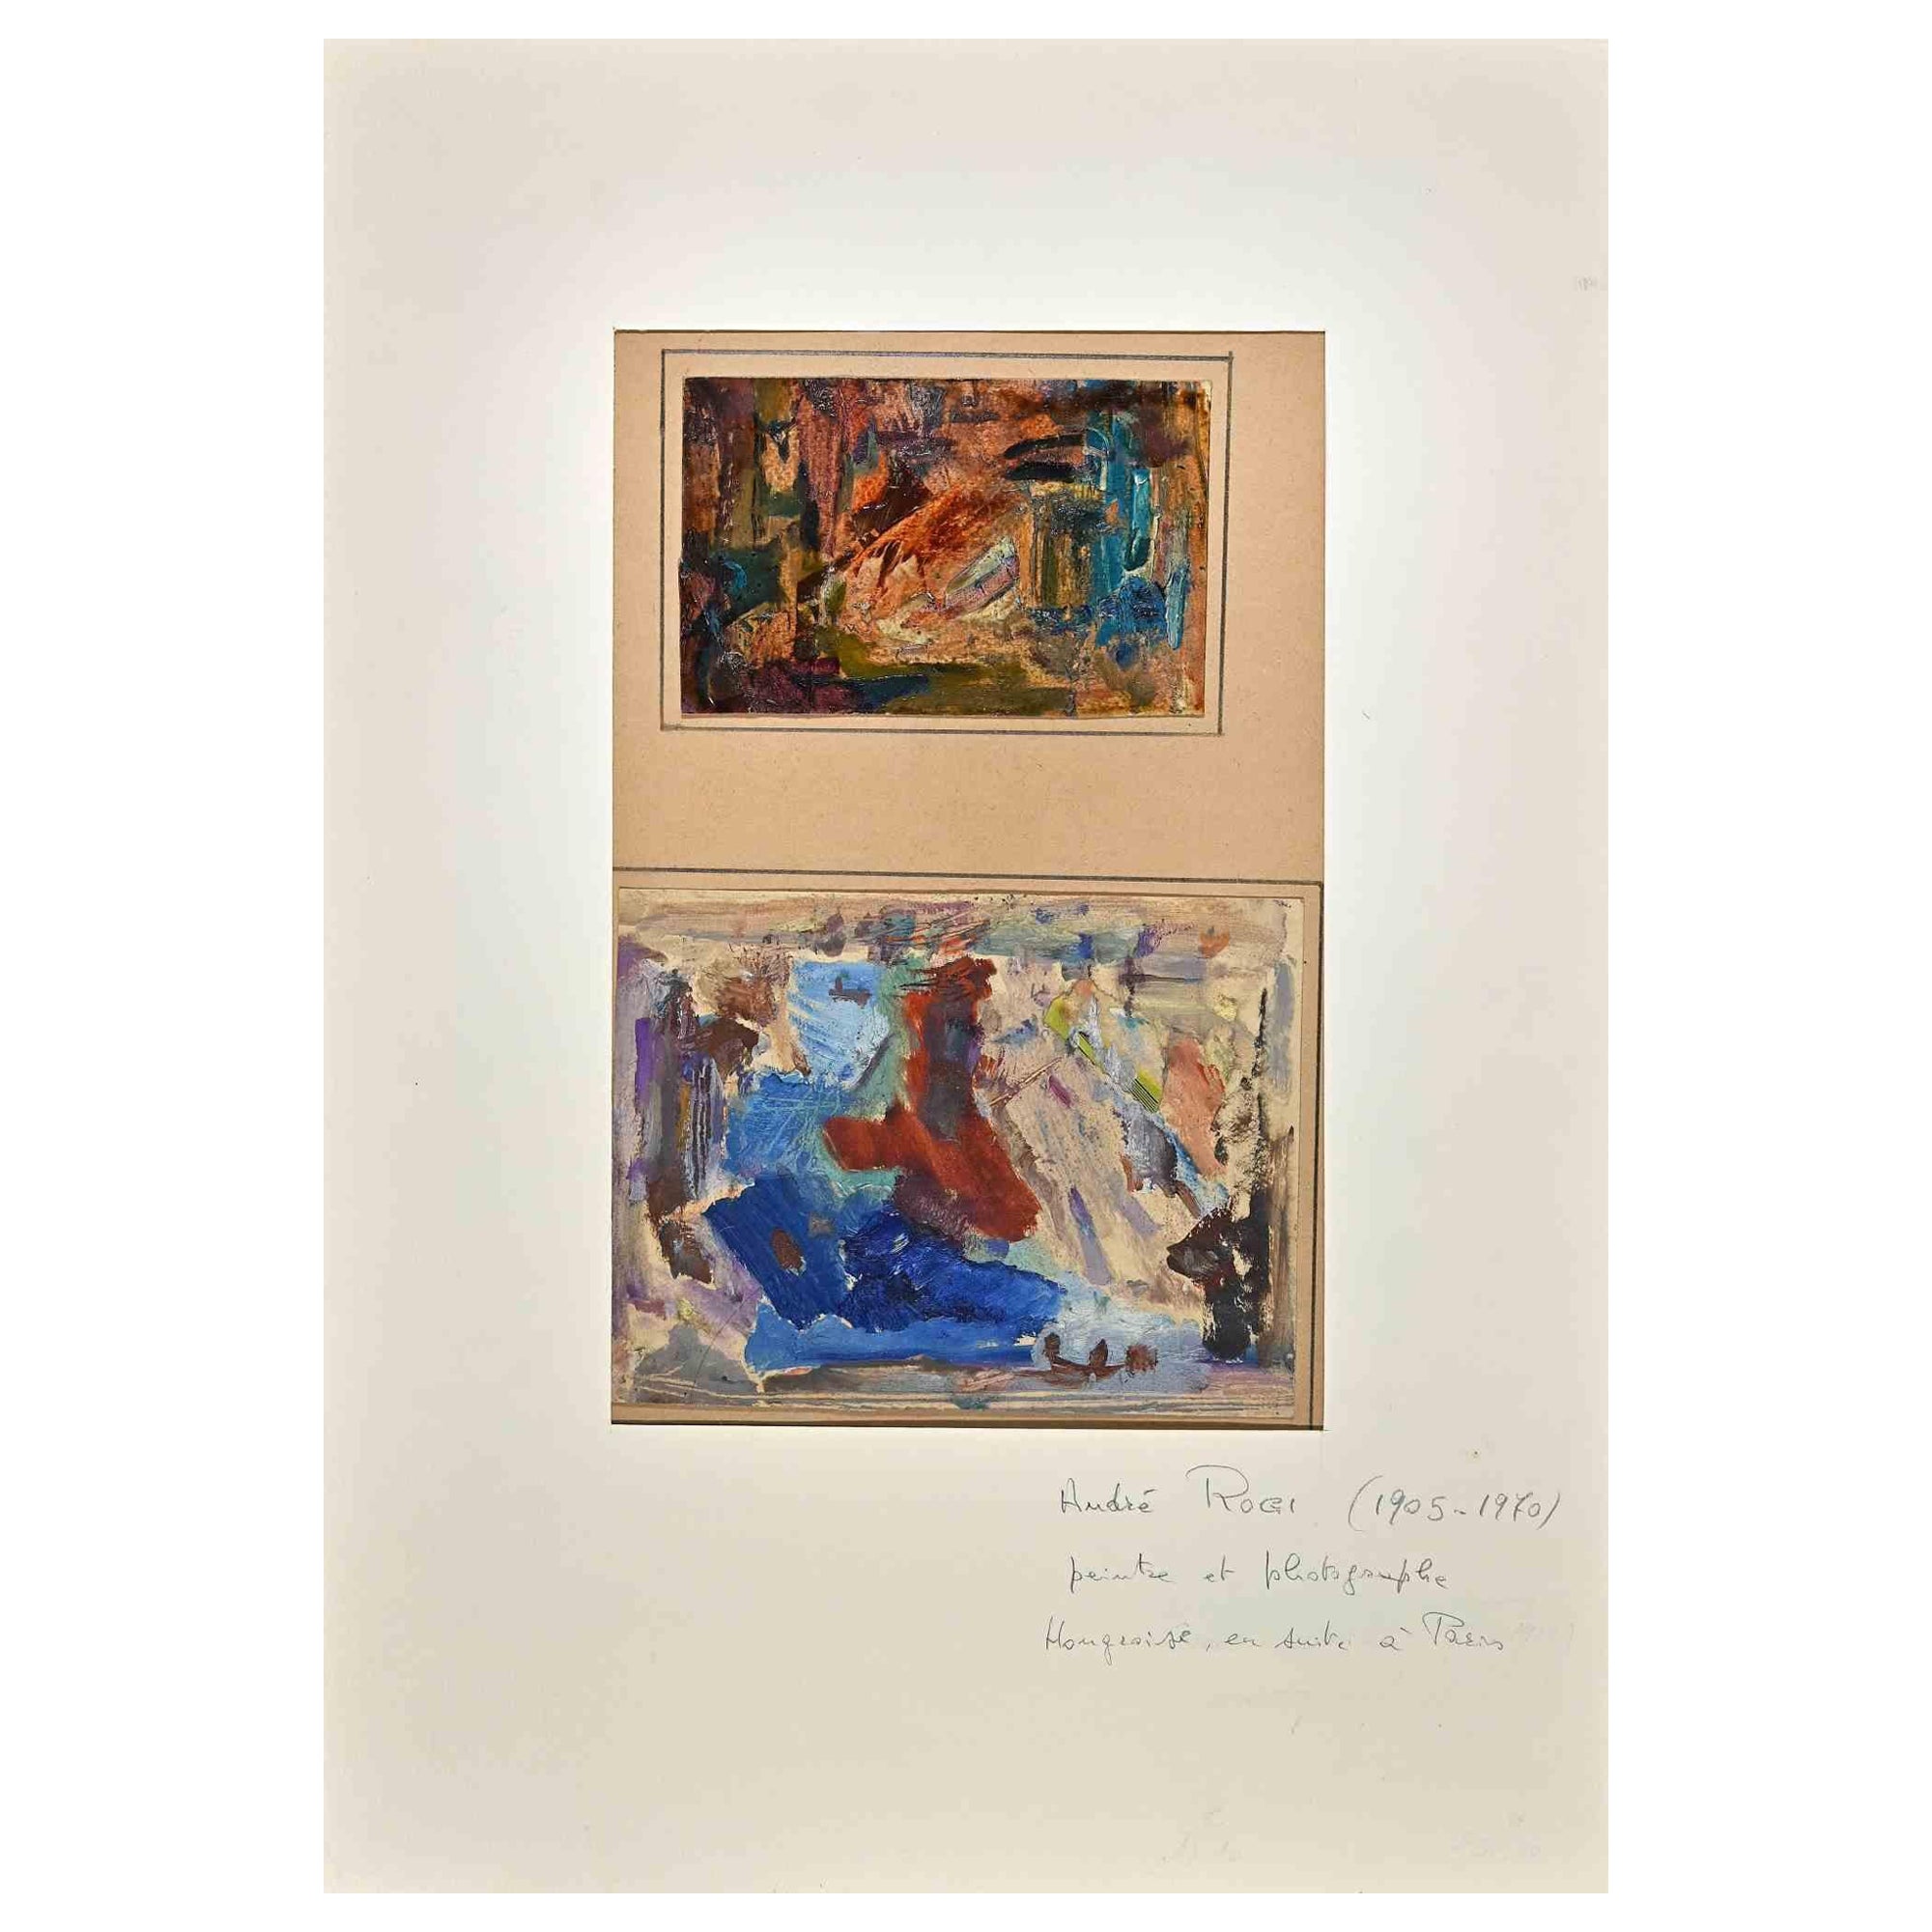 Astract Composition is an Original Oil on Paper realized by André Rogi (1905-1970).

Good condition of the two works included a cream colored cardboard passpartout (50x35 cm).

Signed on plate with pencil.

André Rogi (born Rozsa Klein, 10 August